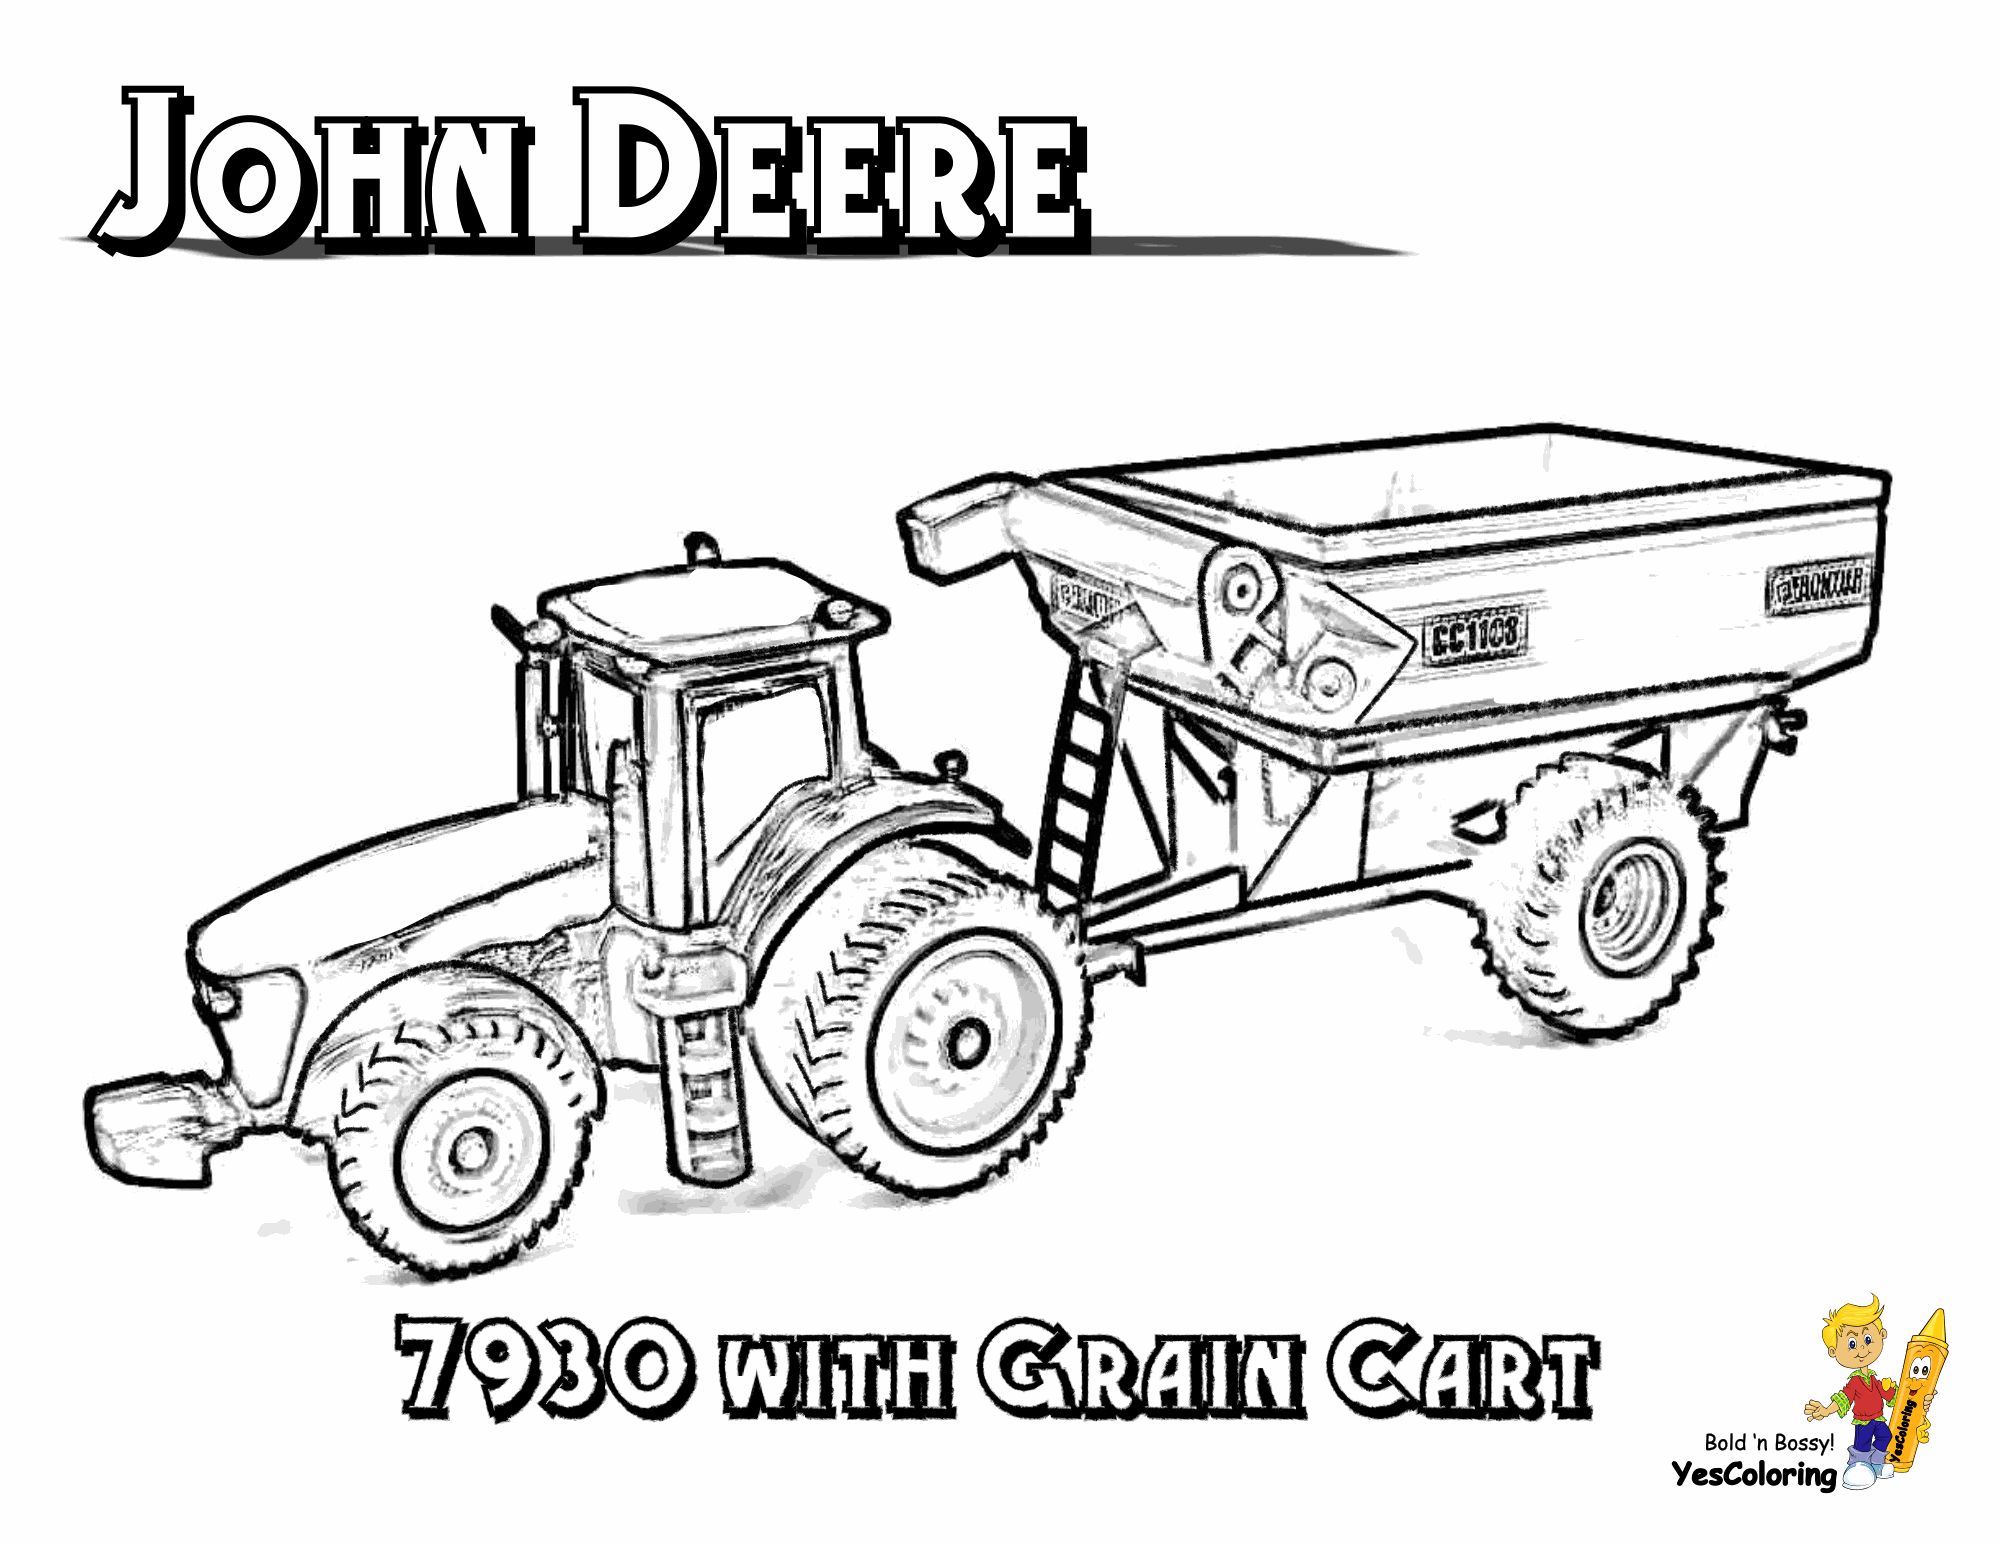 john deere tractor coloring pages hardy tractor coloring tractor free john deere john coloring tractor pages deere 